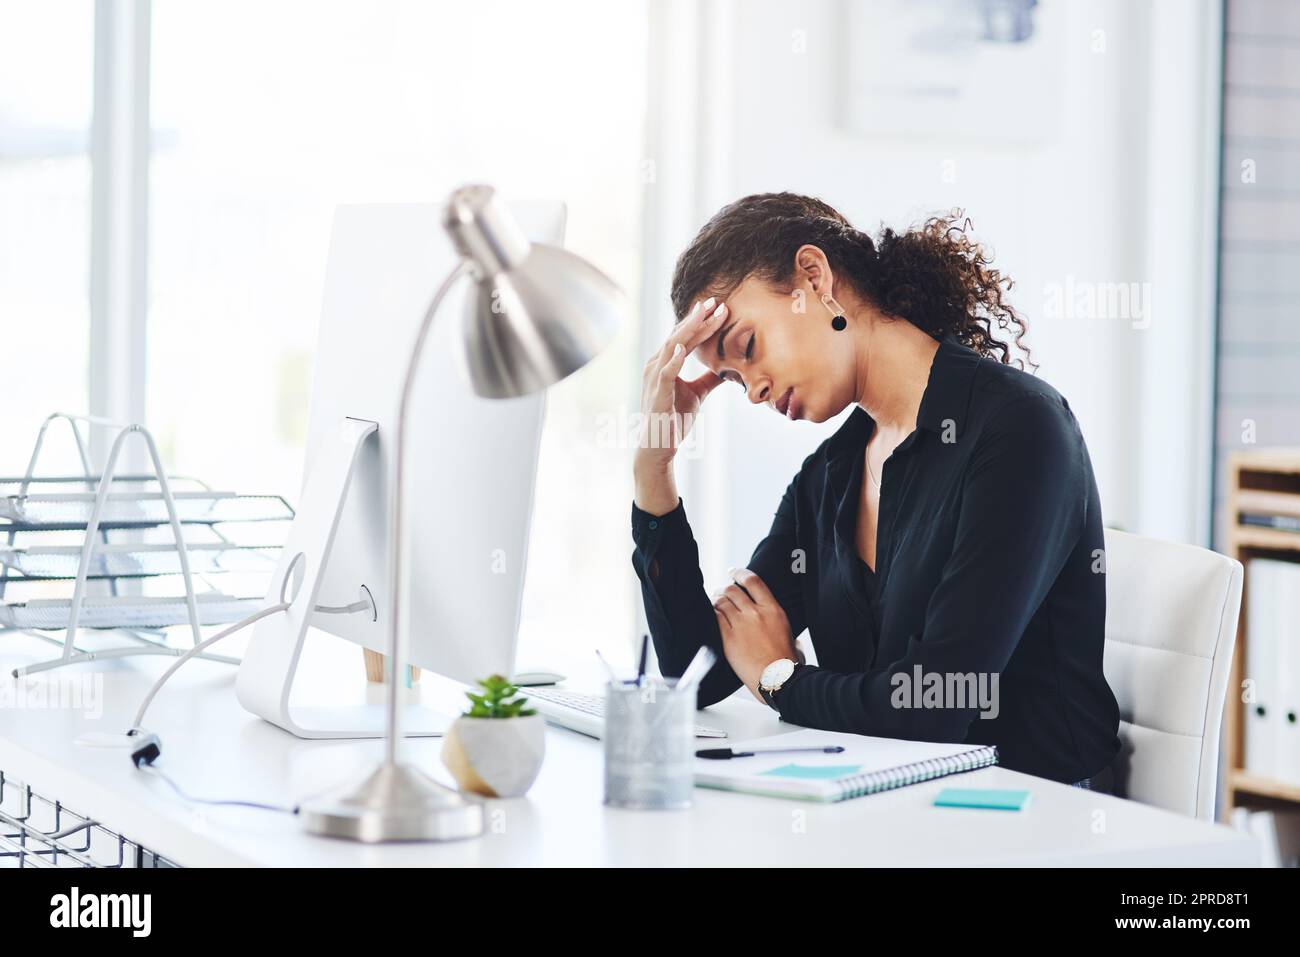 How many more challenges do I have to face today. a young businesswoman looking stressed out while working in an office. Stock Photo